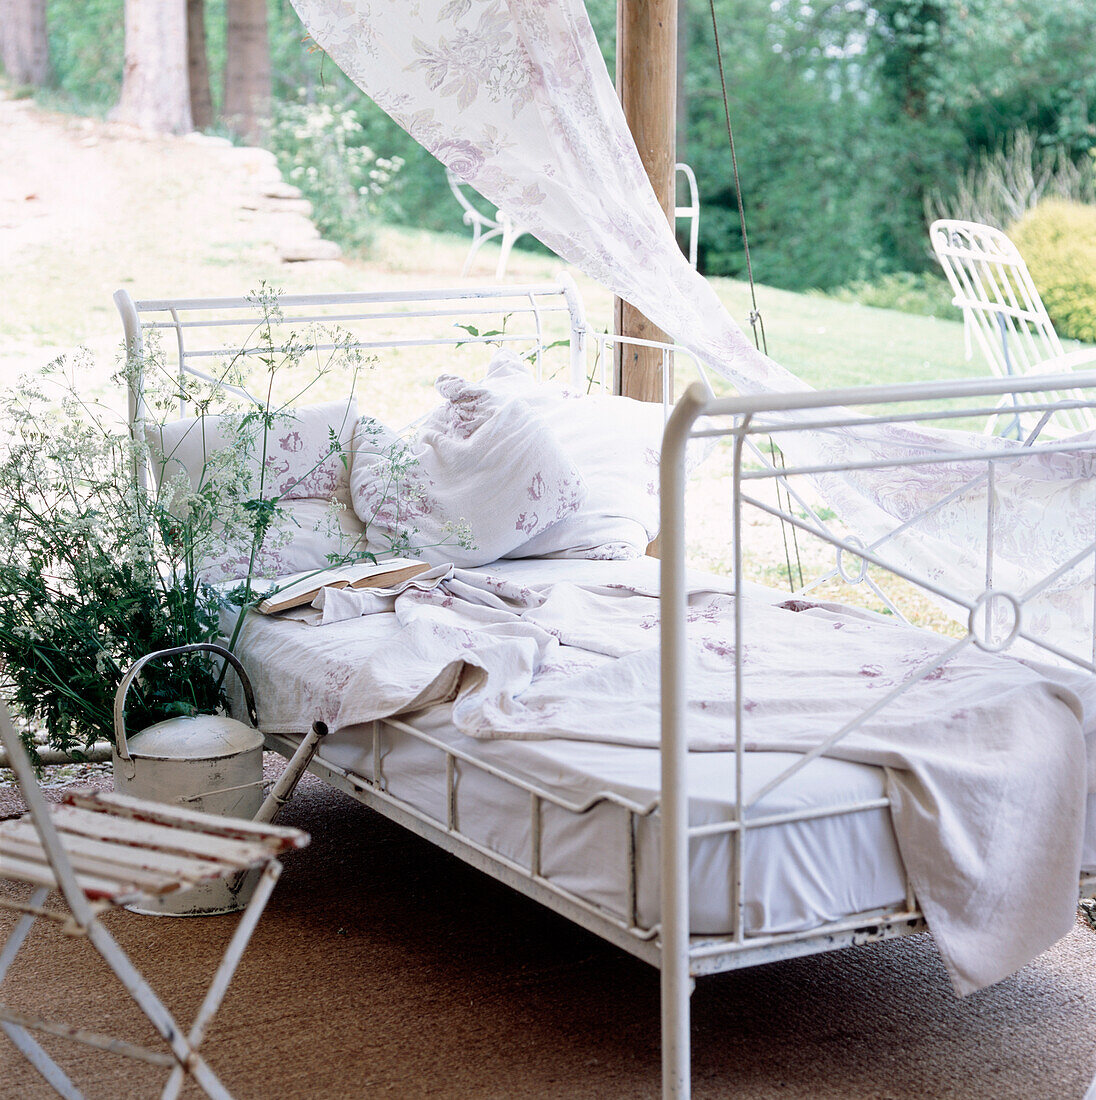 Vintage style daybed in garden summer house